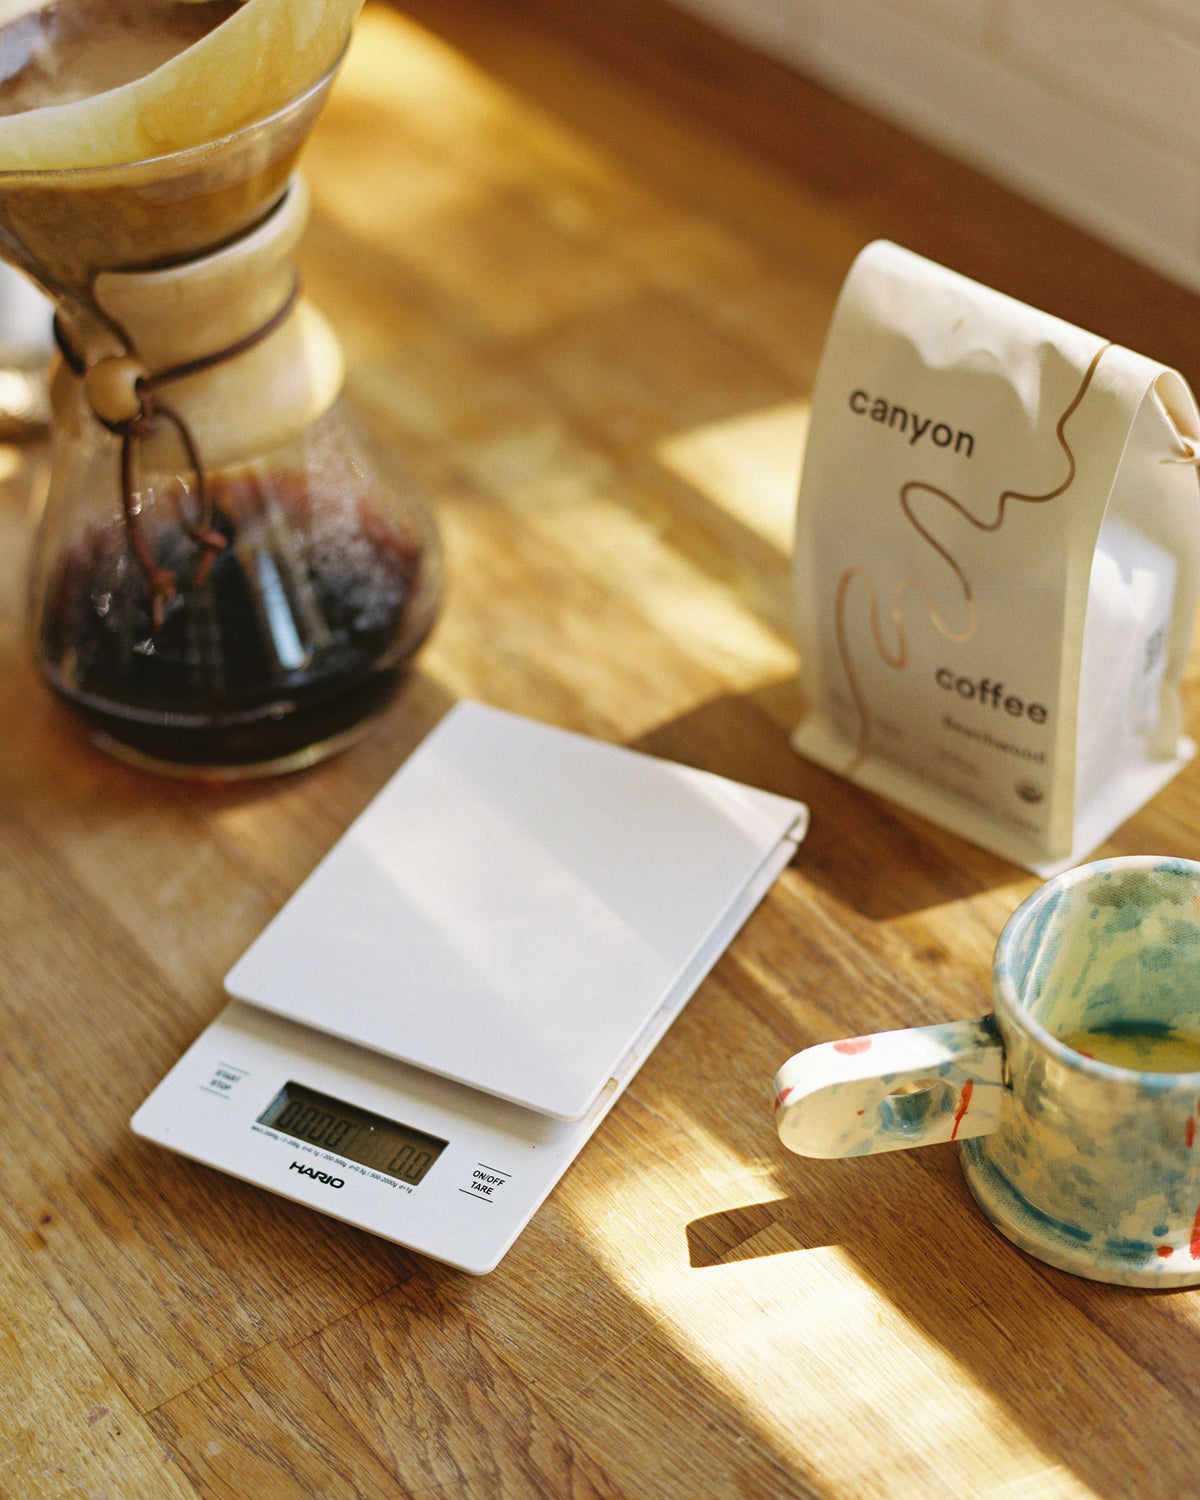 Hario Drip Coffee Scale  The Go-To Scale for Canyon Coffee